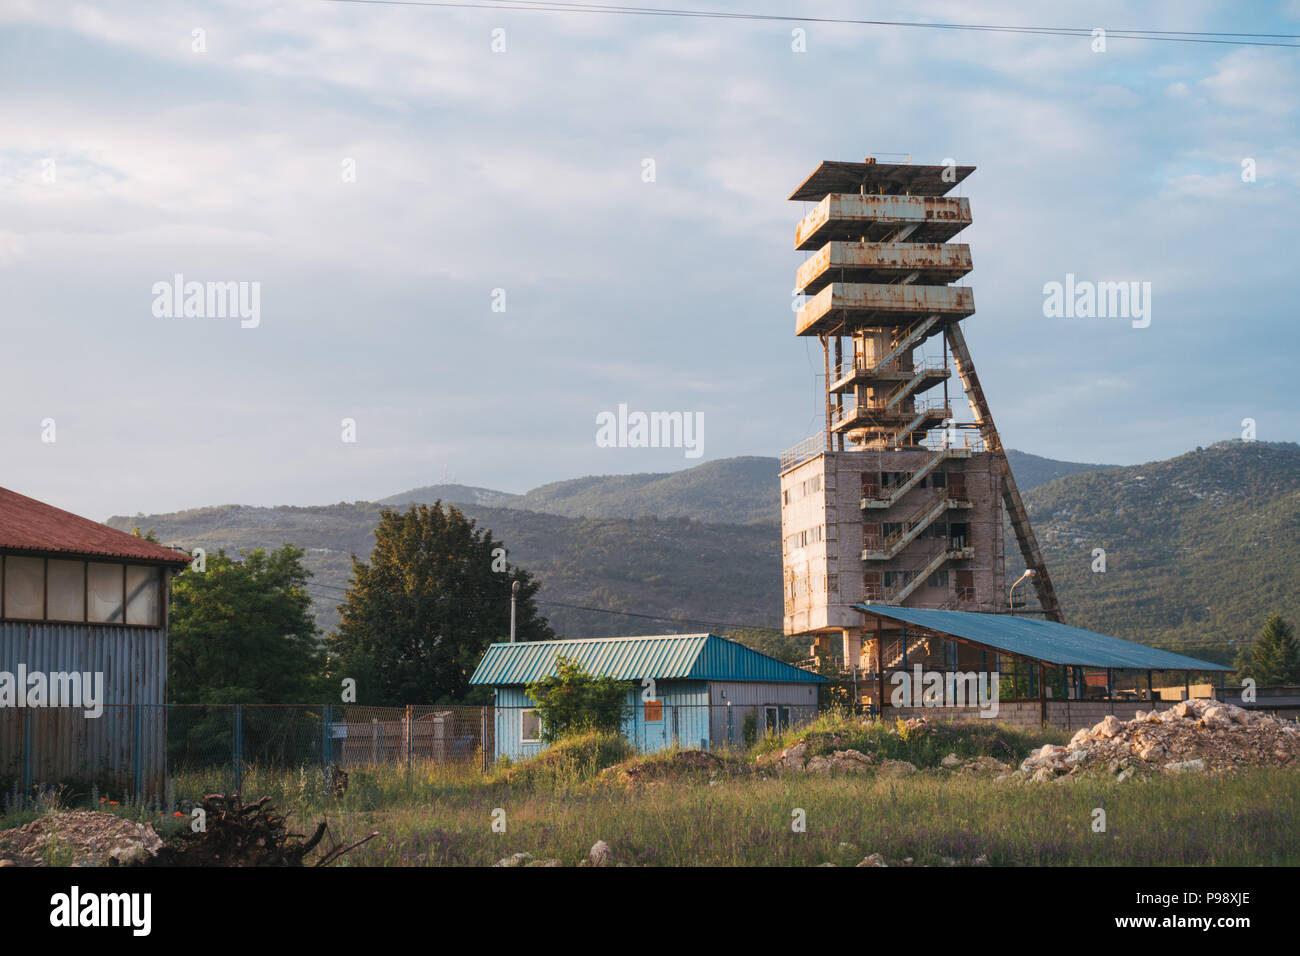 A tower at the entrance to the Niksic Steel Mill, Niksic, Montenegro Stock Photo